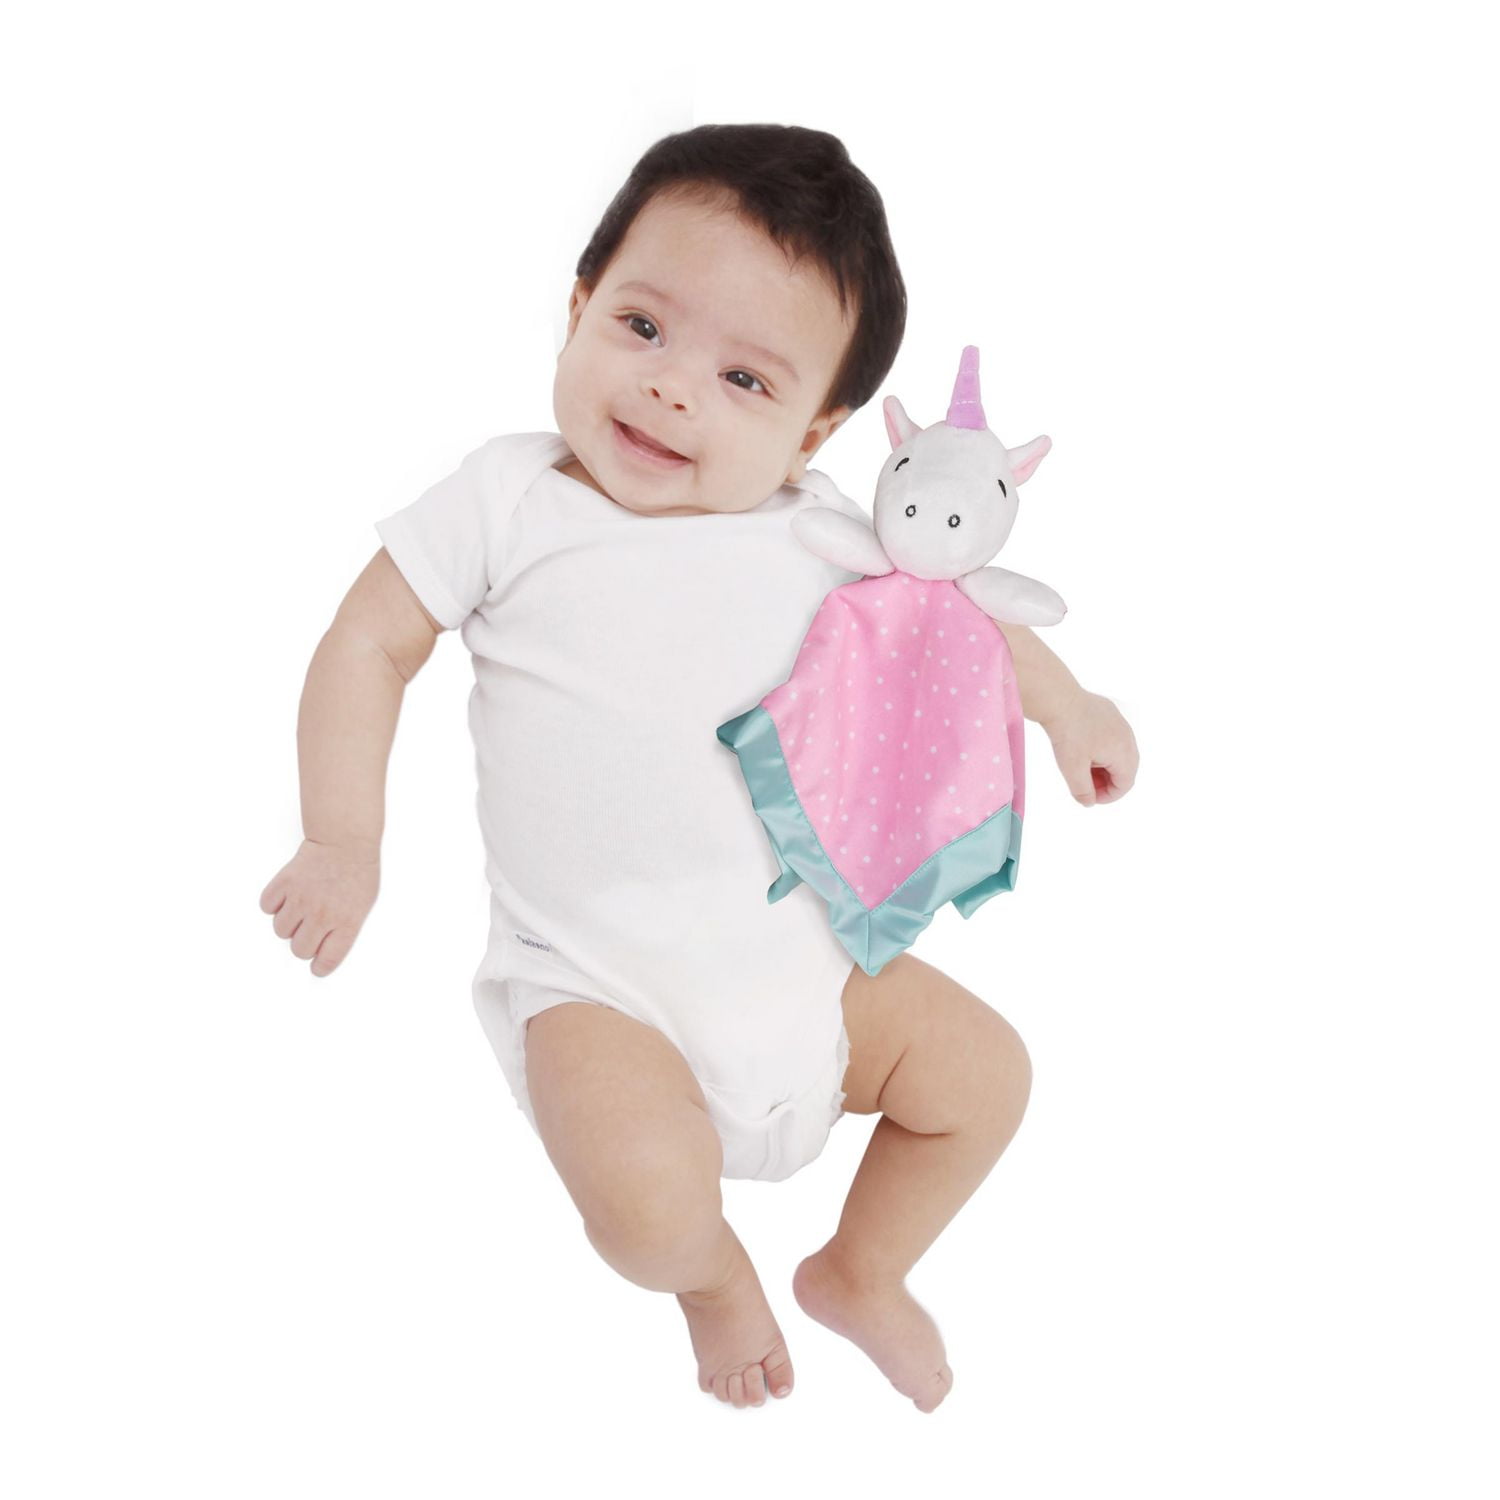 Cute Rascals® Baby Clothes Mommy's Fishing Buddy Baby Bodysuit